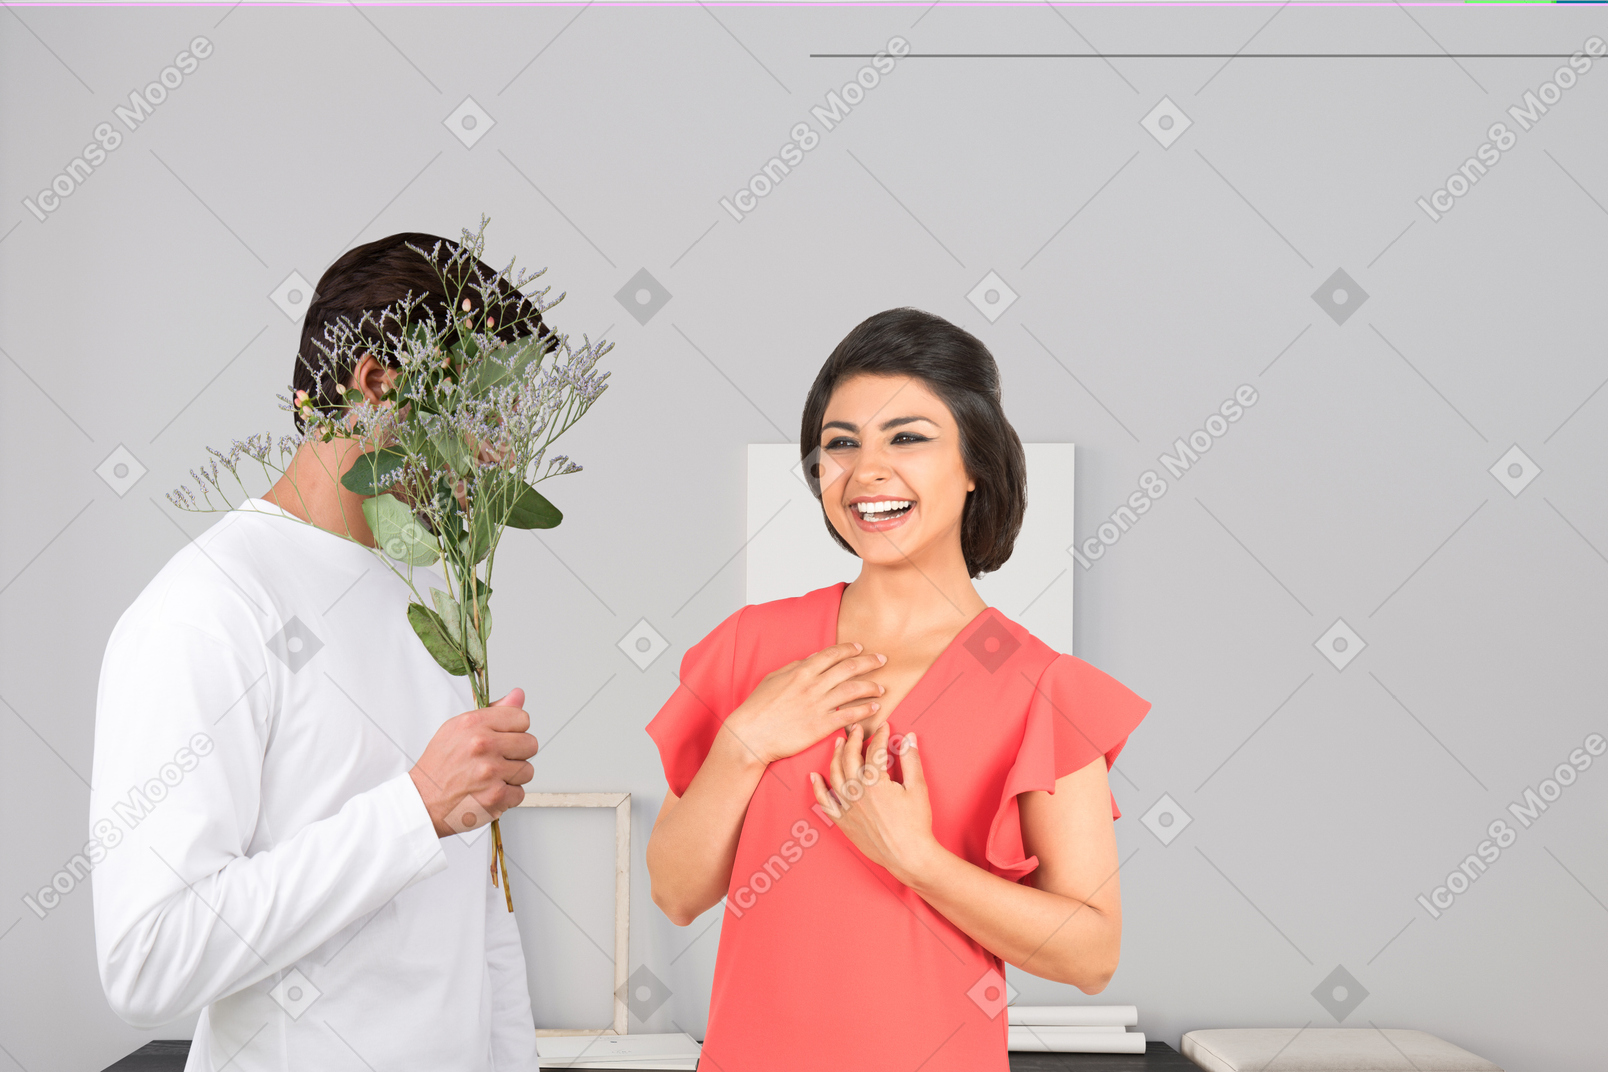 A man standing next to a woman holding a bouquet of flowers